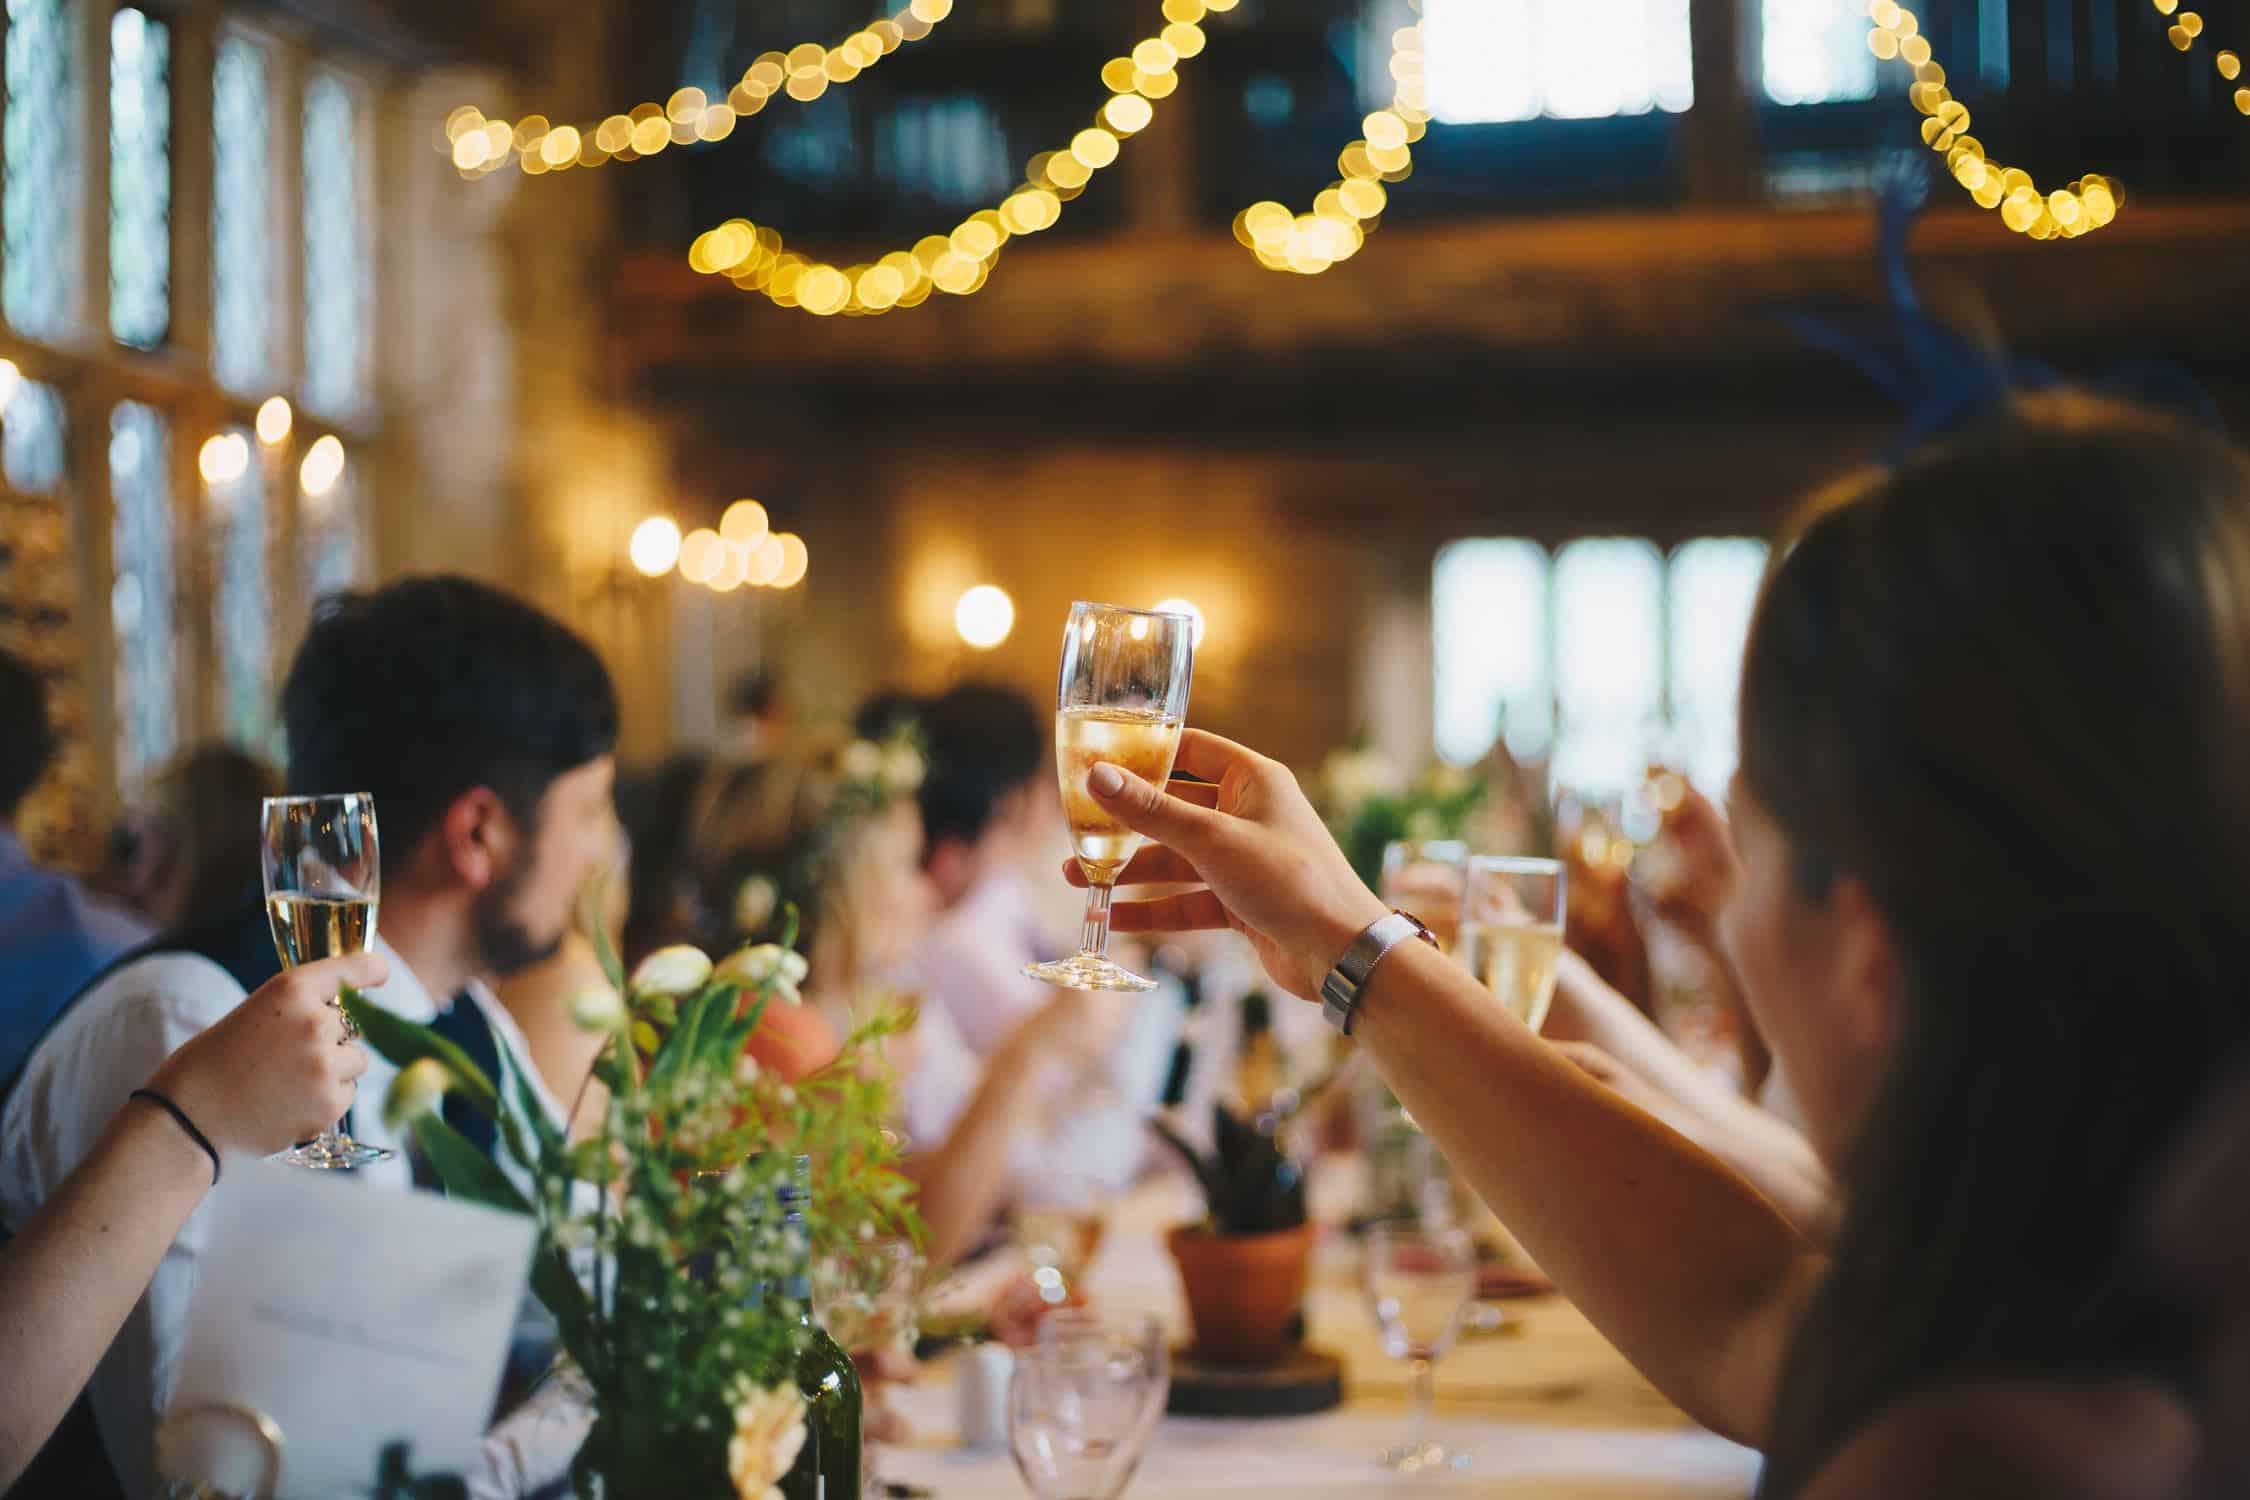 A large formal event. People are gathered at a long wooden table. Everyone is raising a glass for a toast